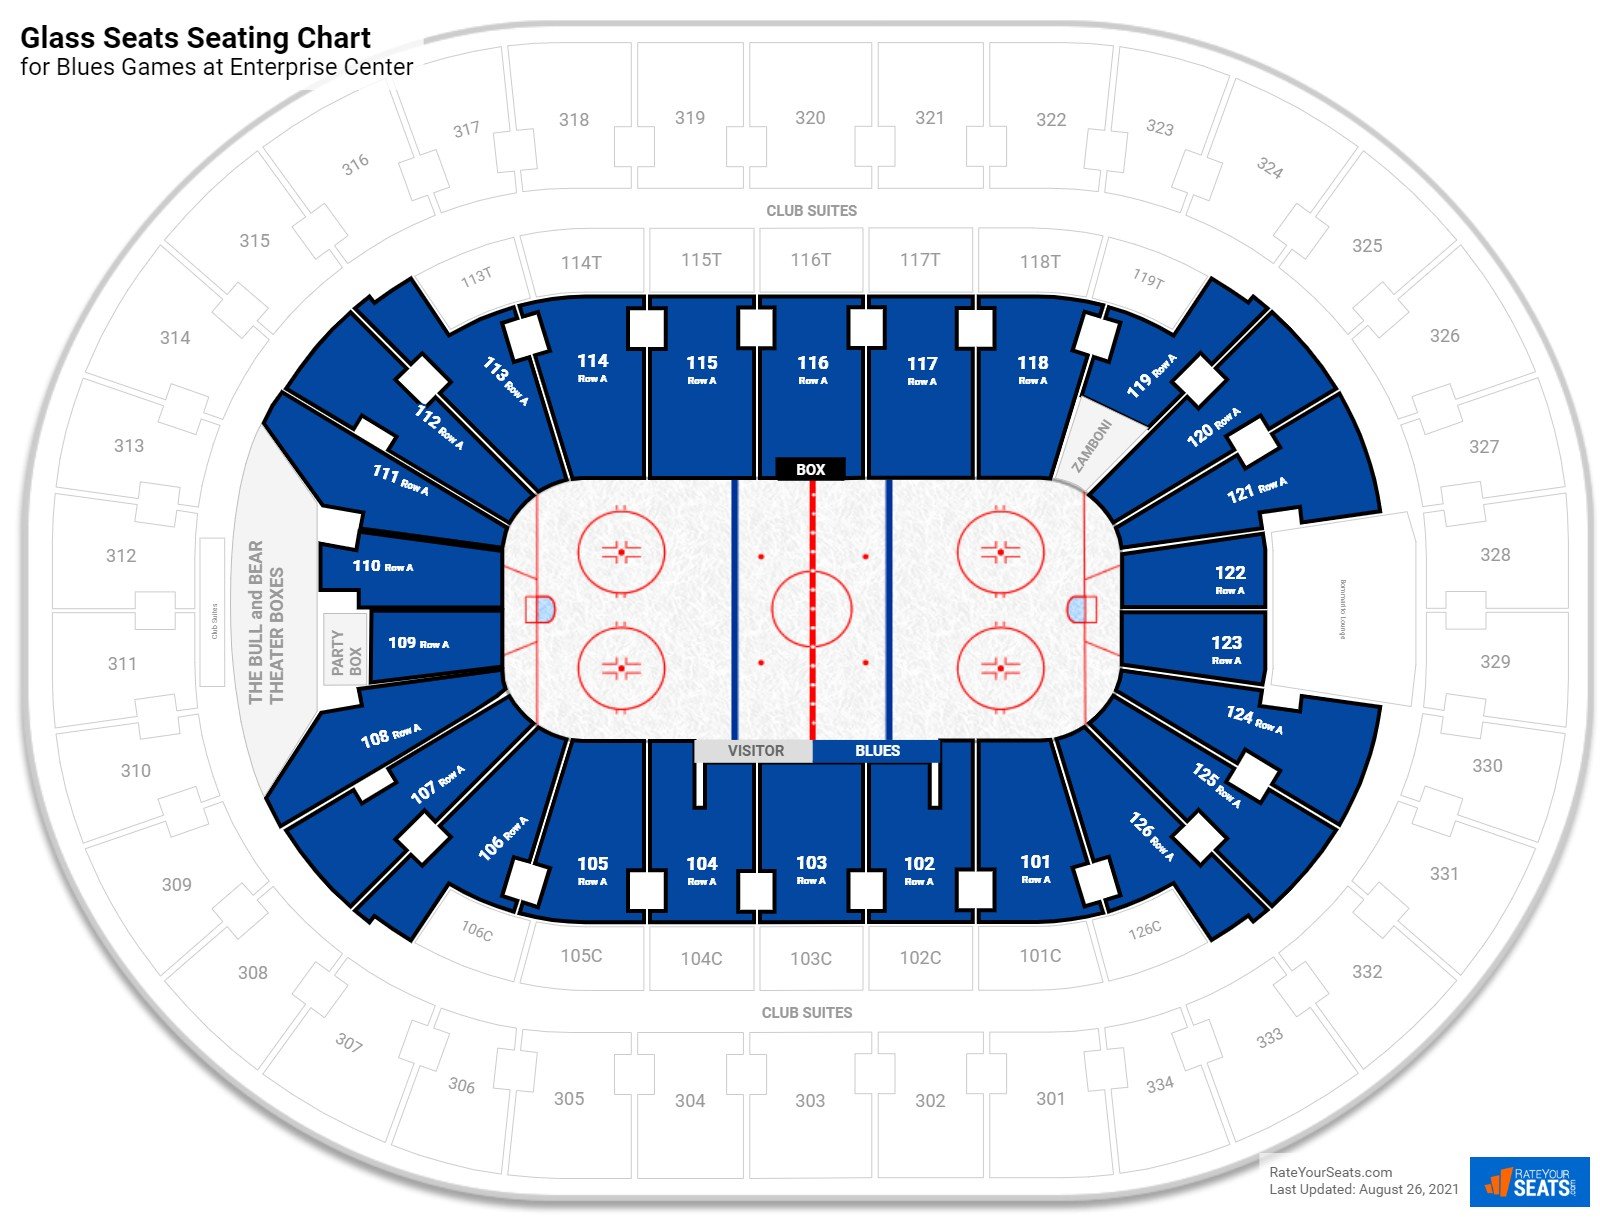 Blues Glass Seats Seating Chart at Enterprise Center